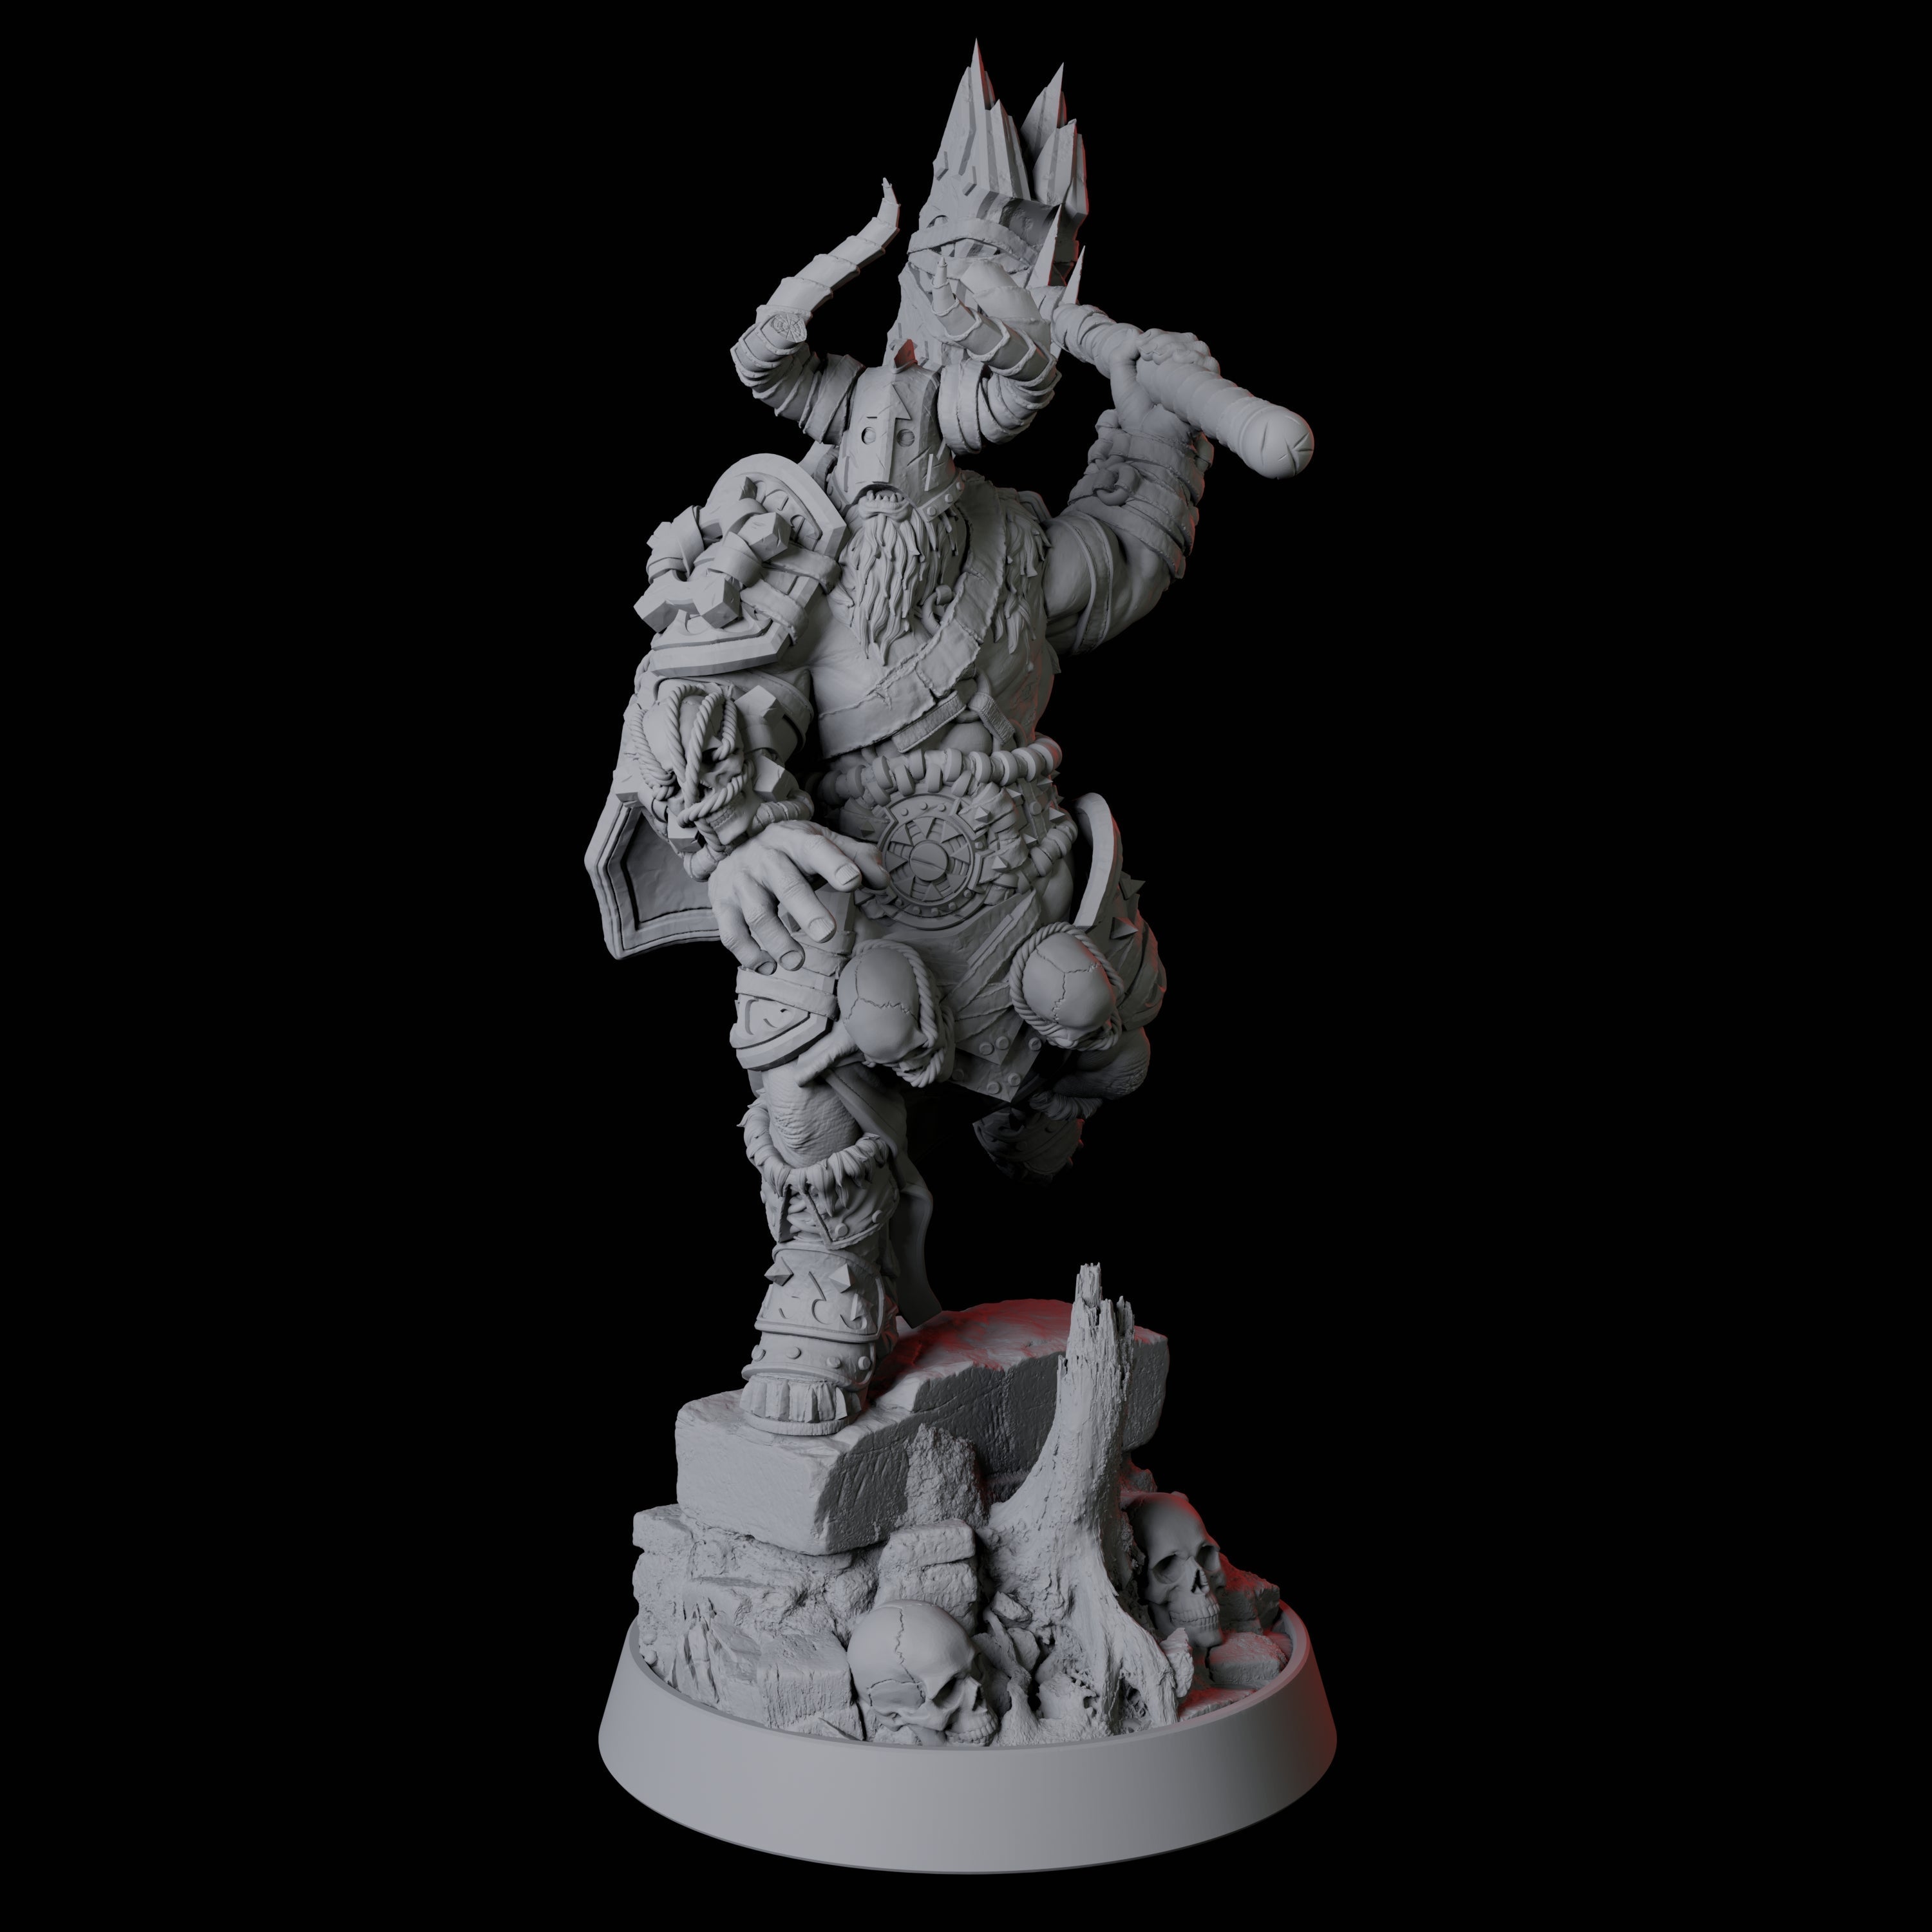 Charging Armoured Barbarian Miniature for Dungeons and Dragons